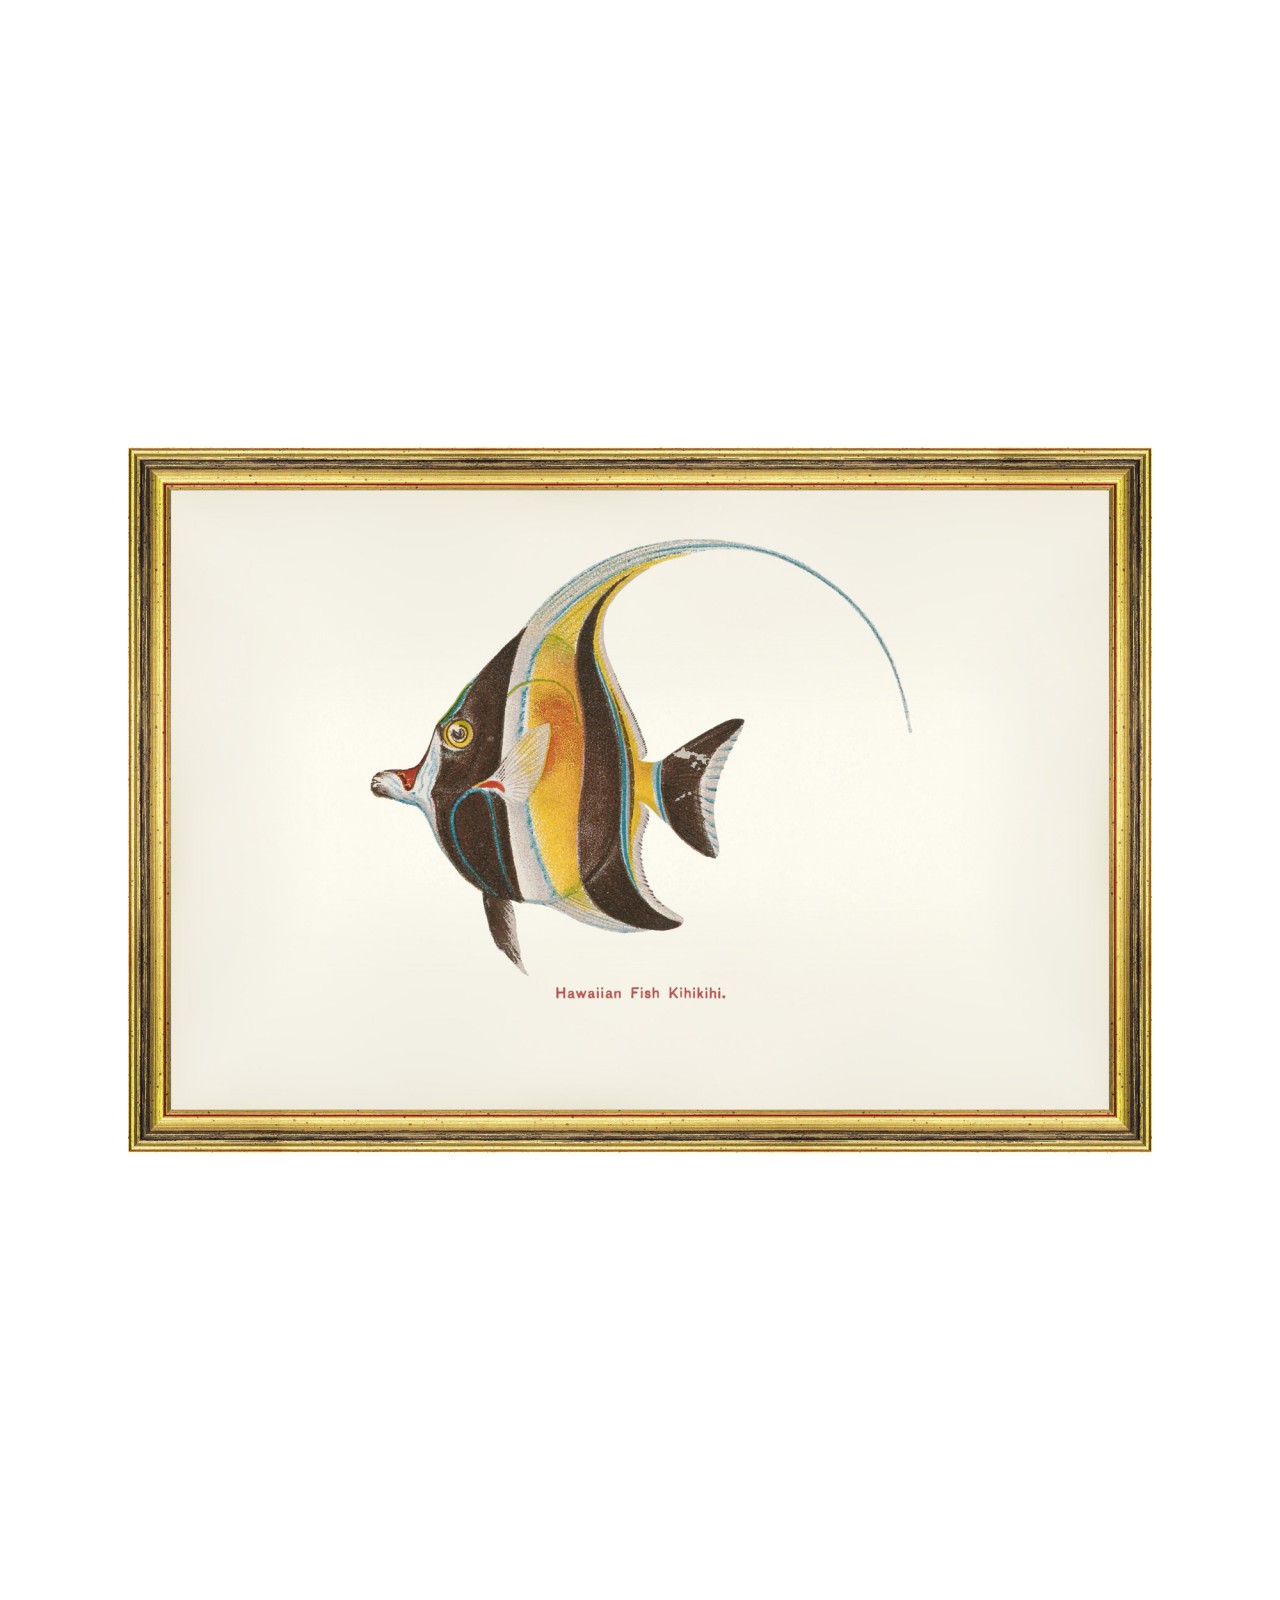 images/productimages/small/kihikihi-fish-60x40cm-glass-size-rama-2490-00.jpg